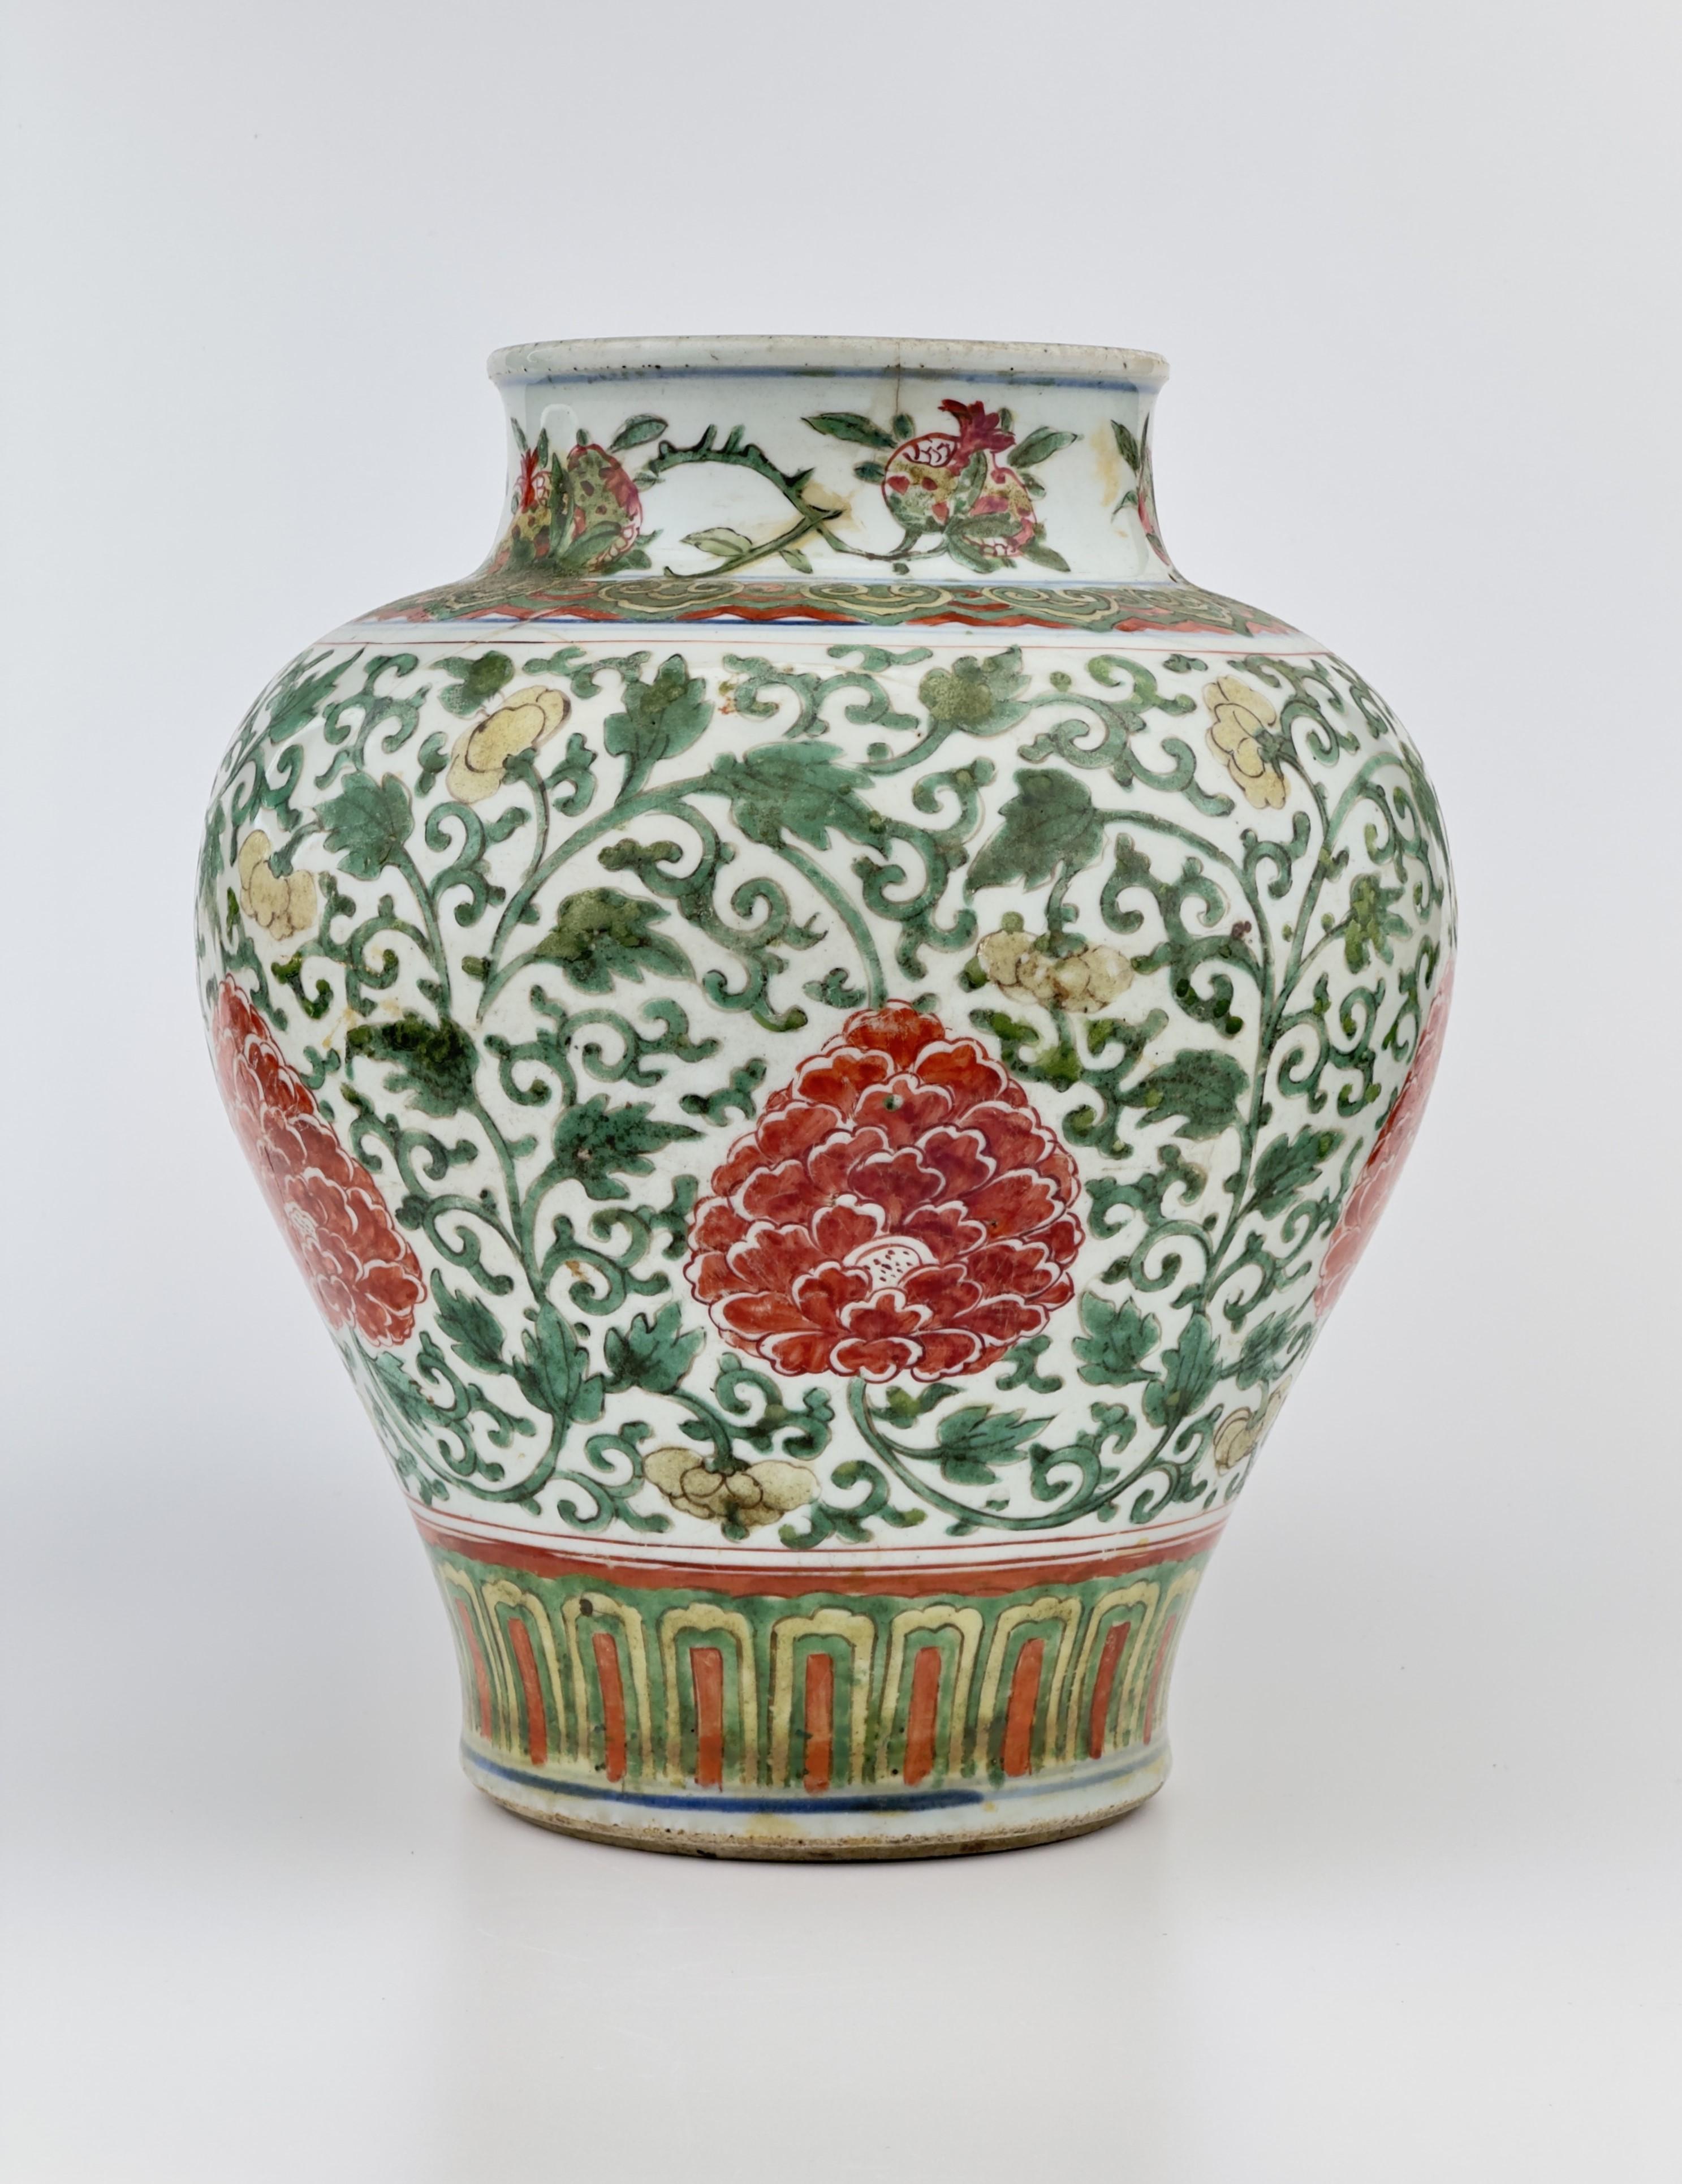 The jar features a balanced and robust form, typical of the Transitional period, which was a time of significant change and innovation in Chinese porcelain art. The decoration is exuberant, with bold red and green colors dominating the palette,